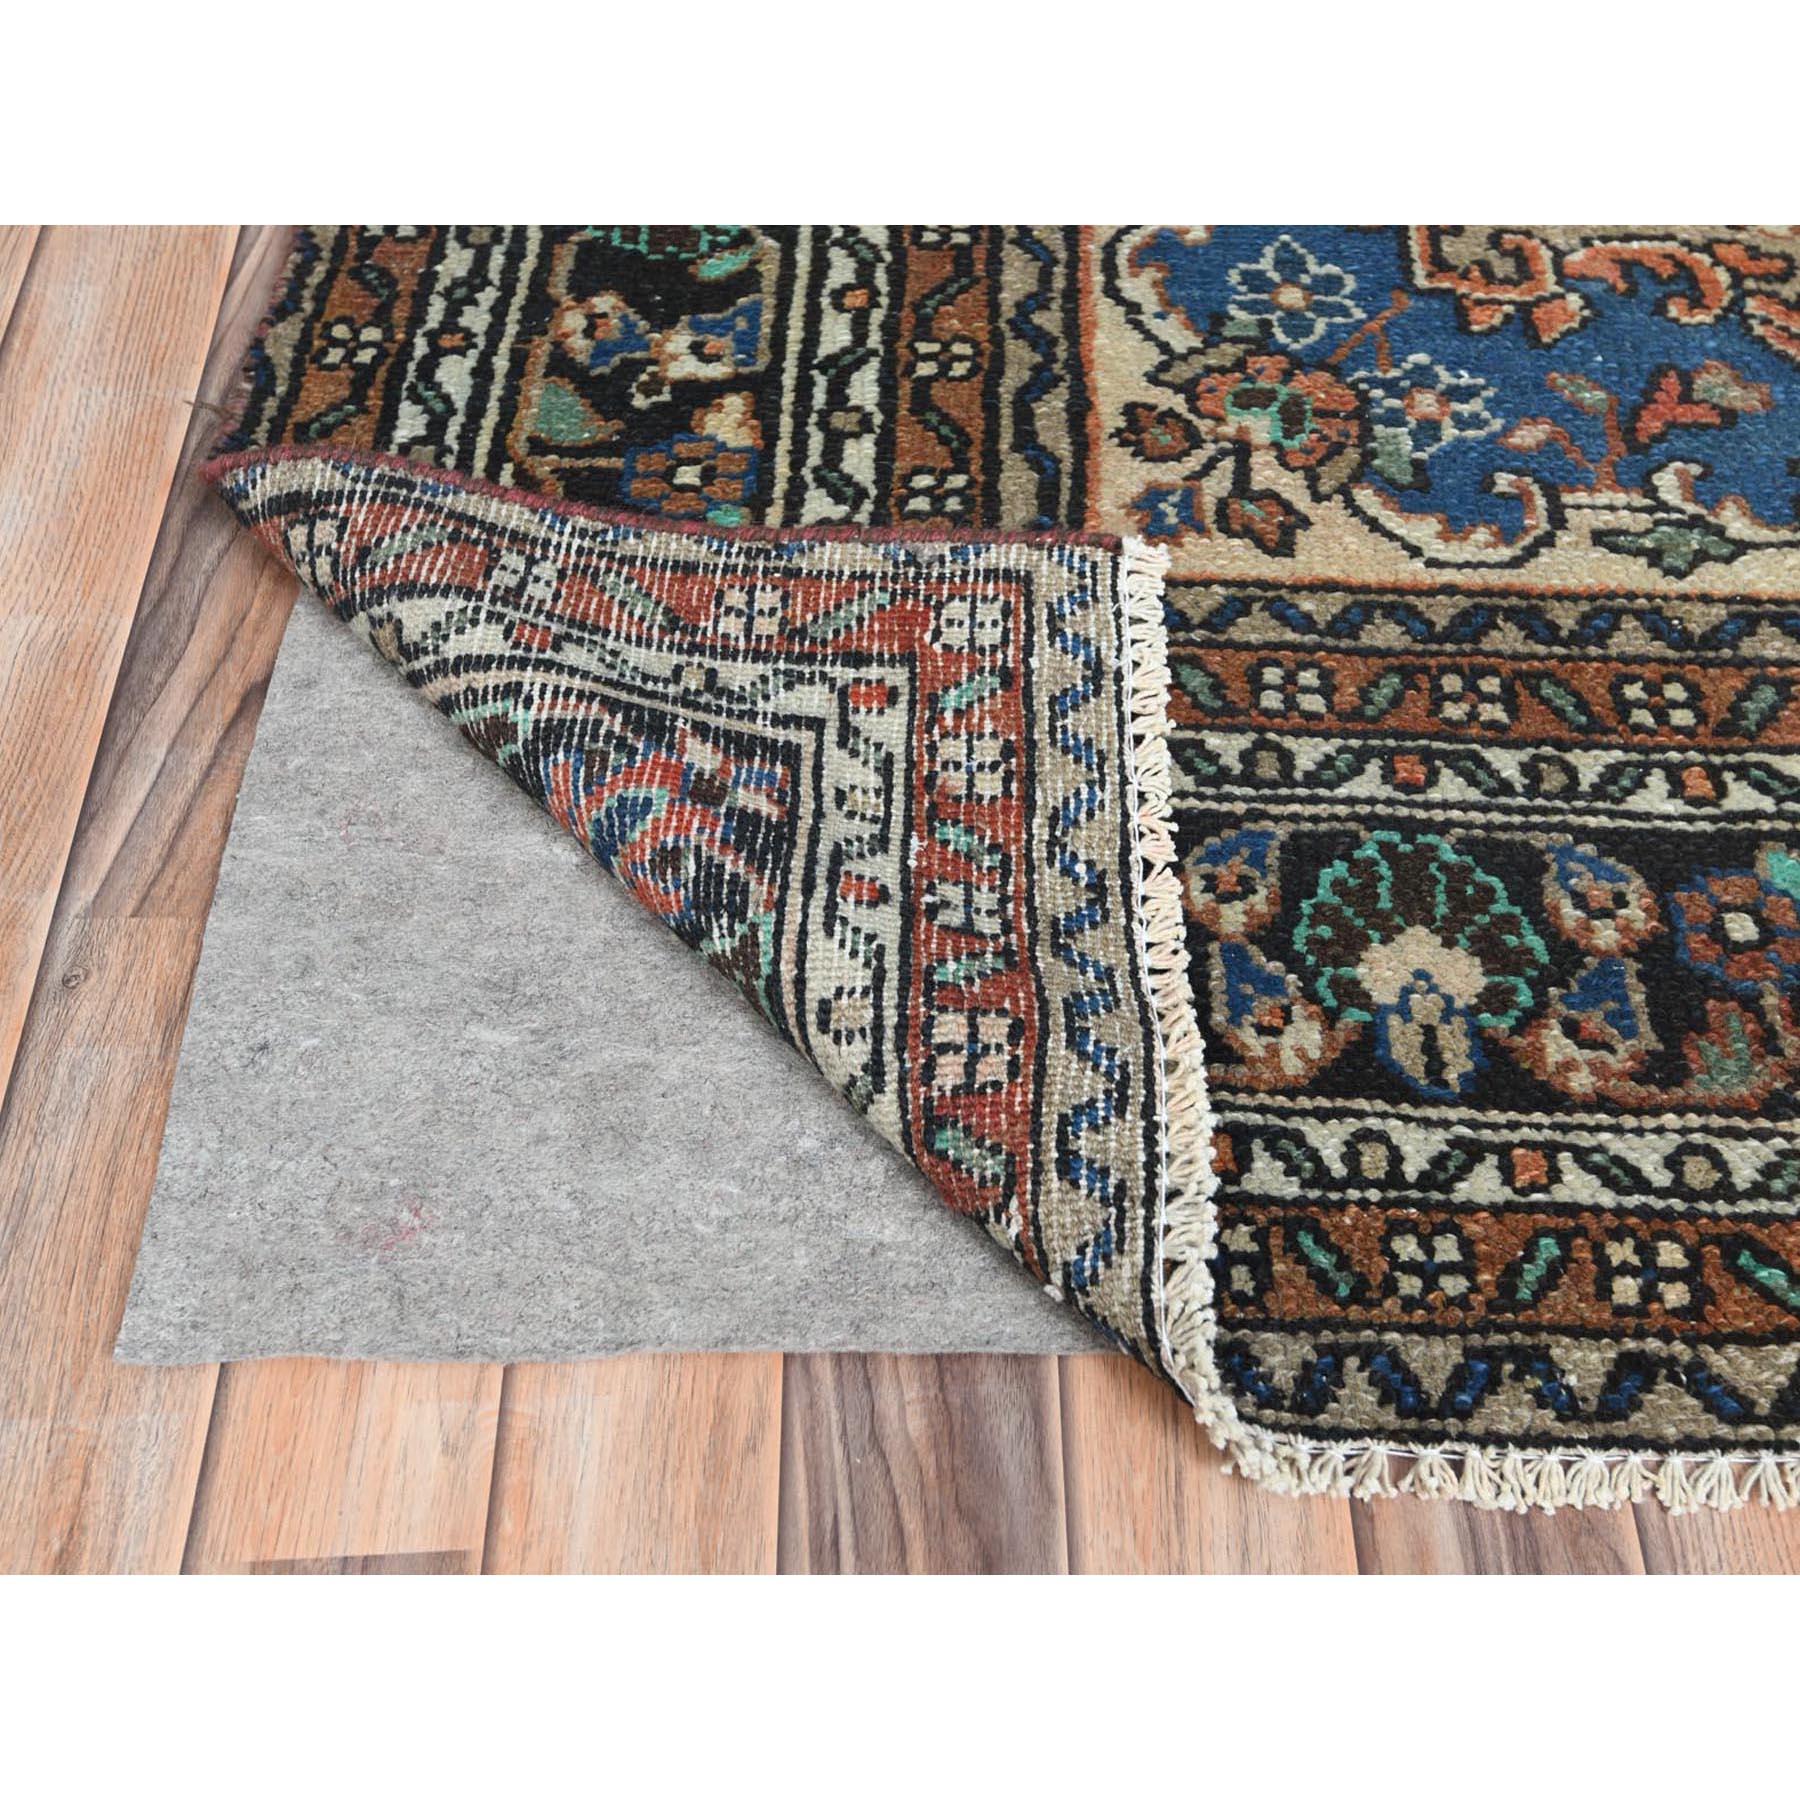 Rust Color Distressed Look Worn Wool Hand Knotted Vintage Persian Bibikabad Rug In Good Condition For Sale In Carlstadt, NJ